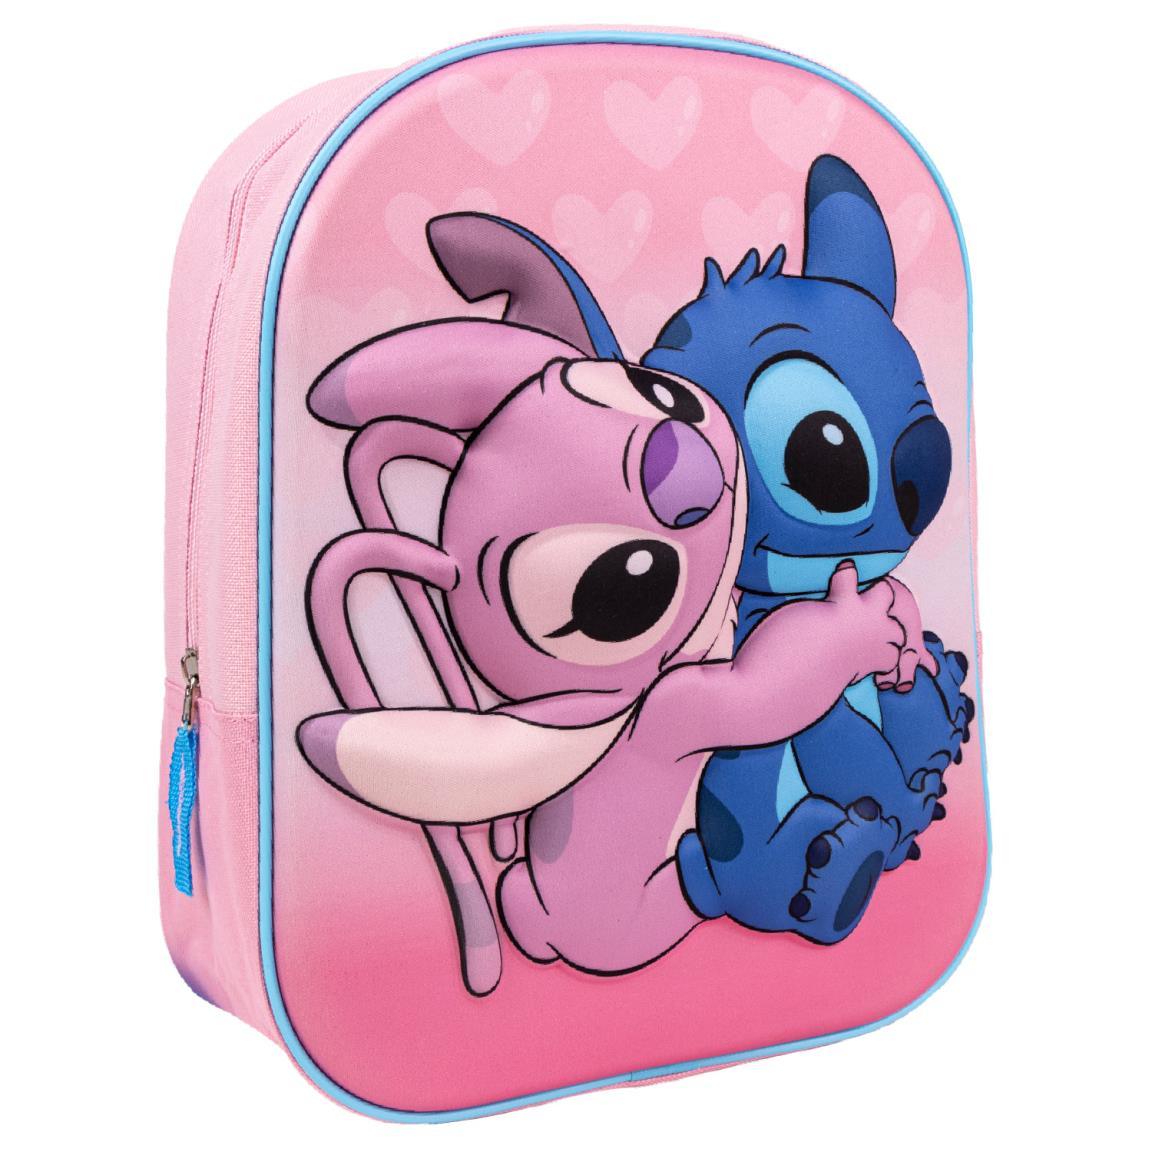 Cerda group LOL Lunch Bag With Accessories Pink